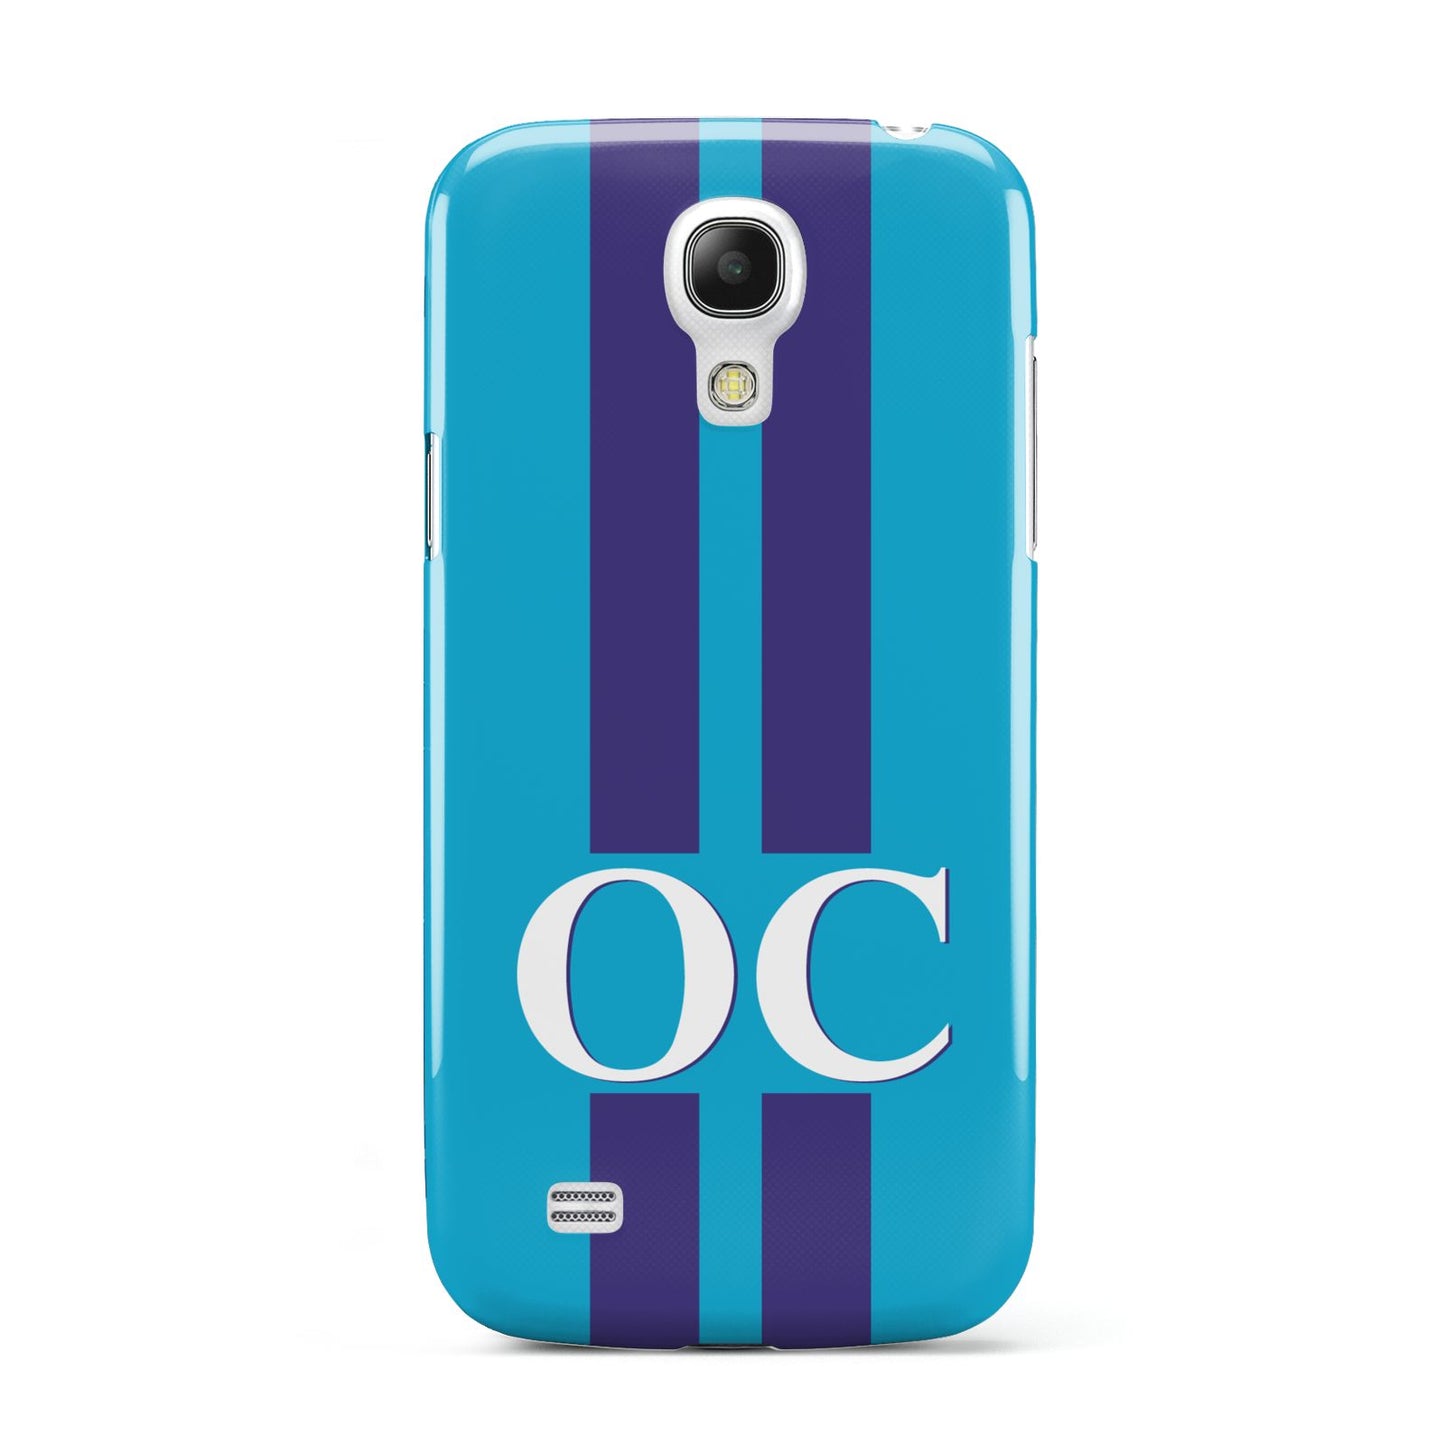 Turquoise Personalised Samsung Galaxy S4 Mini Case